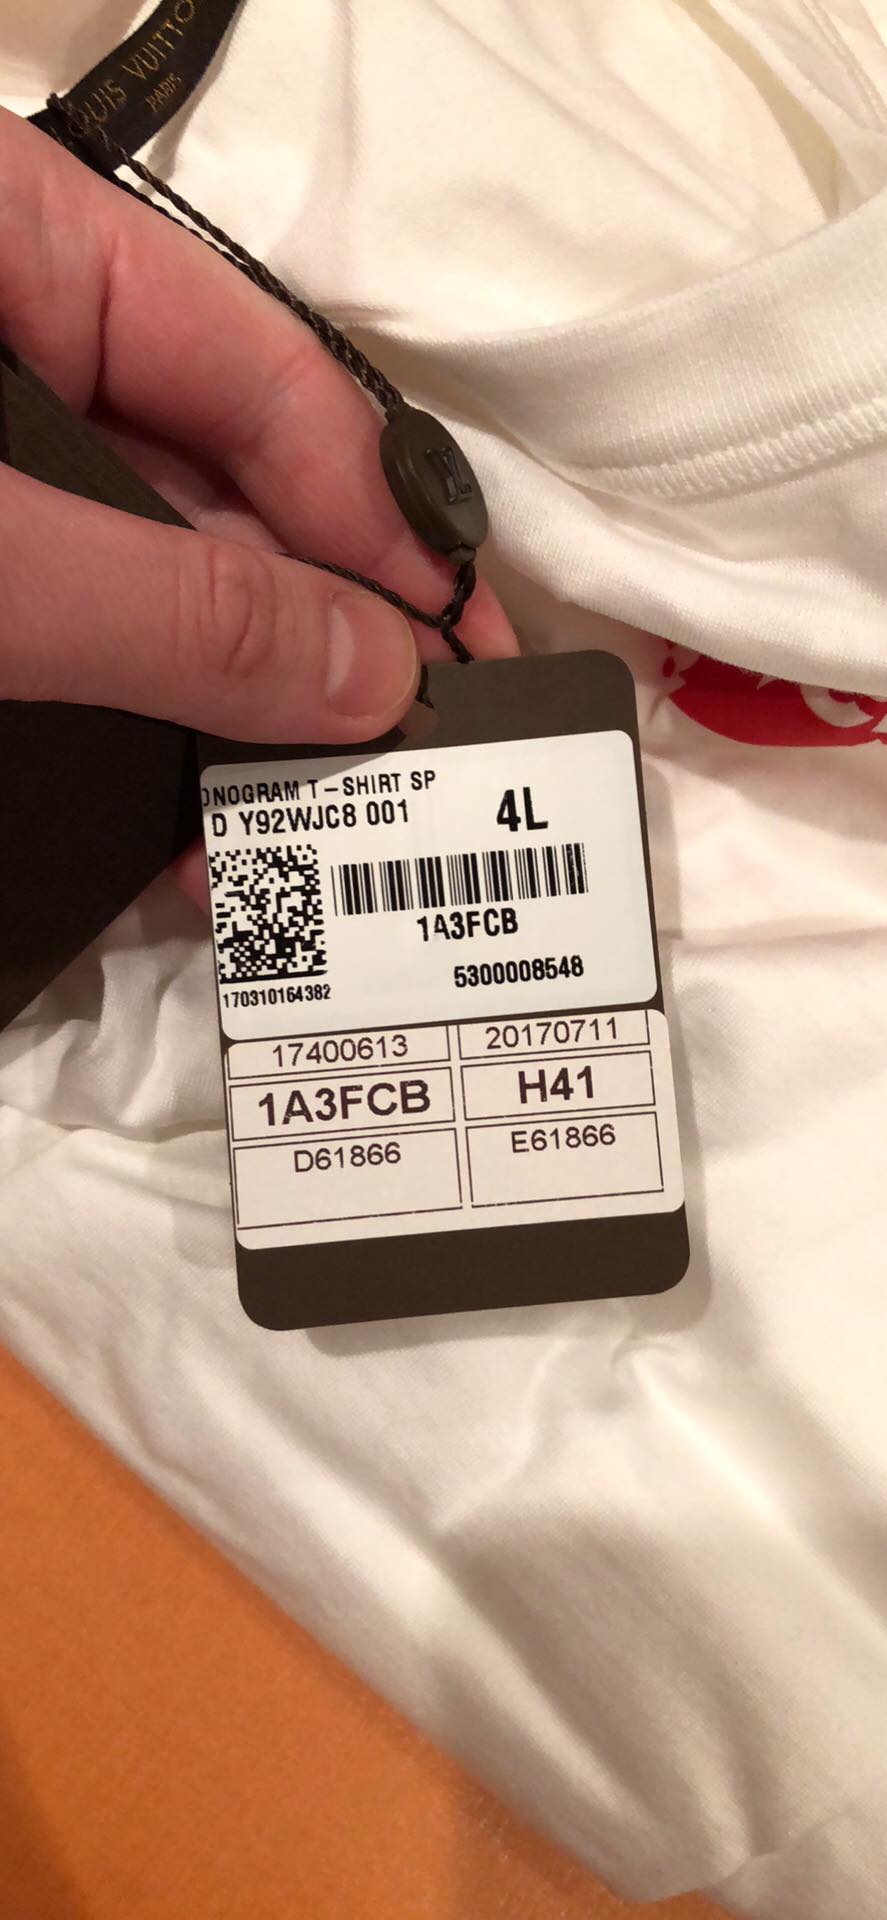 Step 4: Look at the wash tags of your Supreme x Louis Vuitton